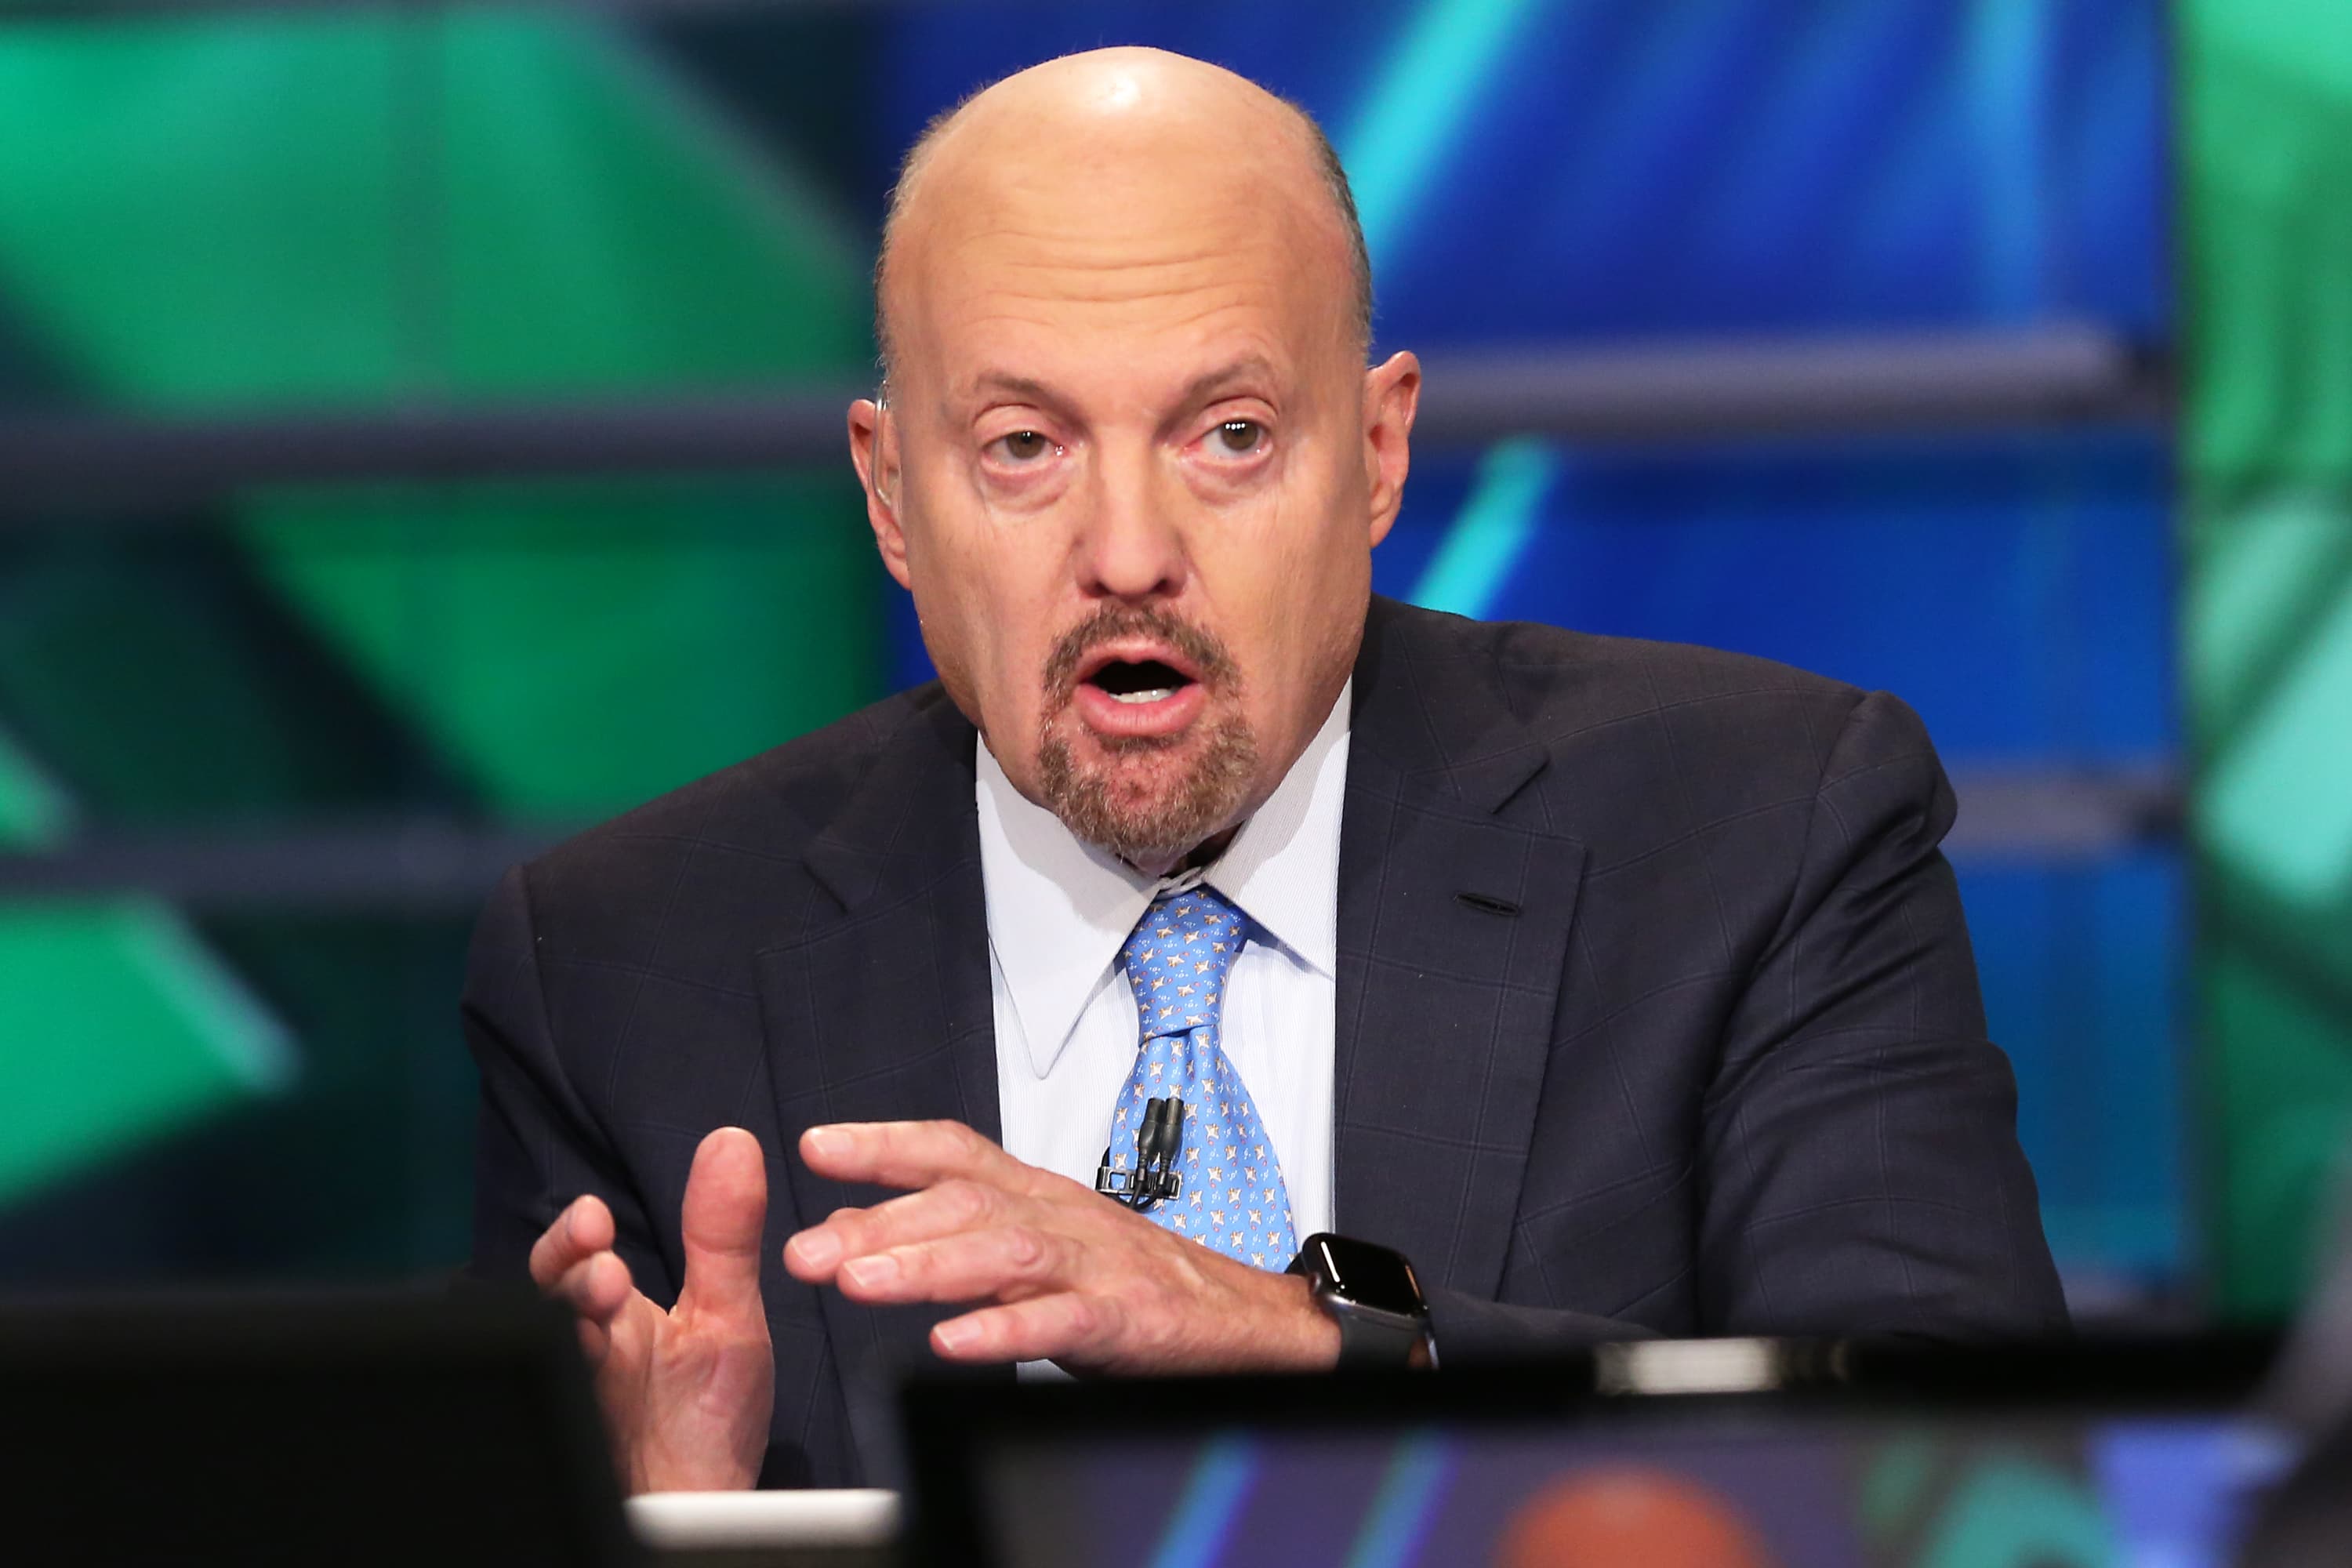 Jim Cramer says he sold some of his bitcoin and paid off a mortgage